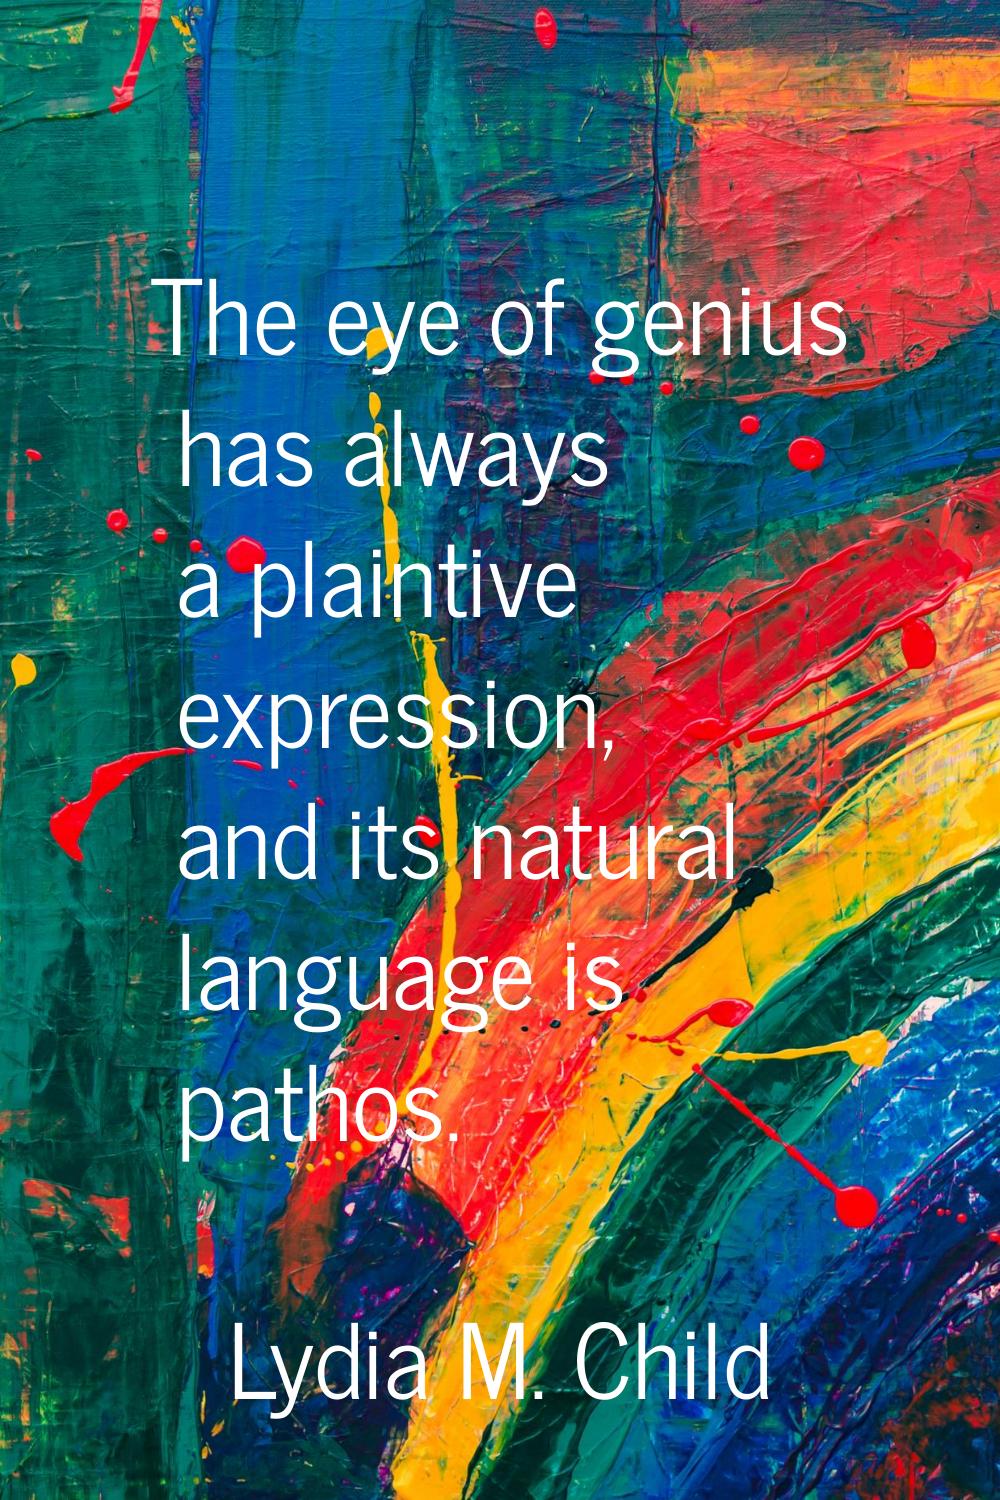 The eye of genius has always a plaintive expression, and its natural language is pathos.